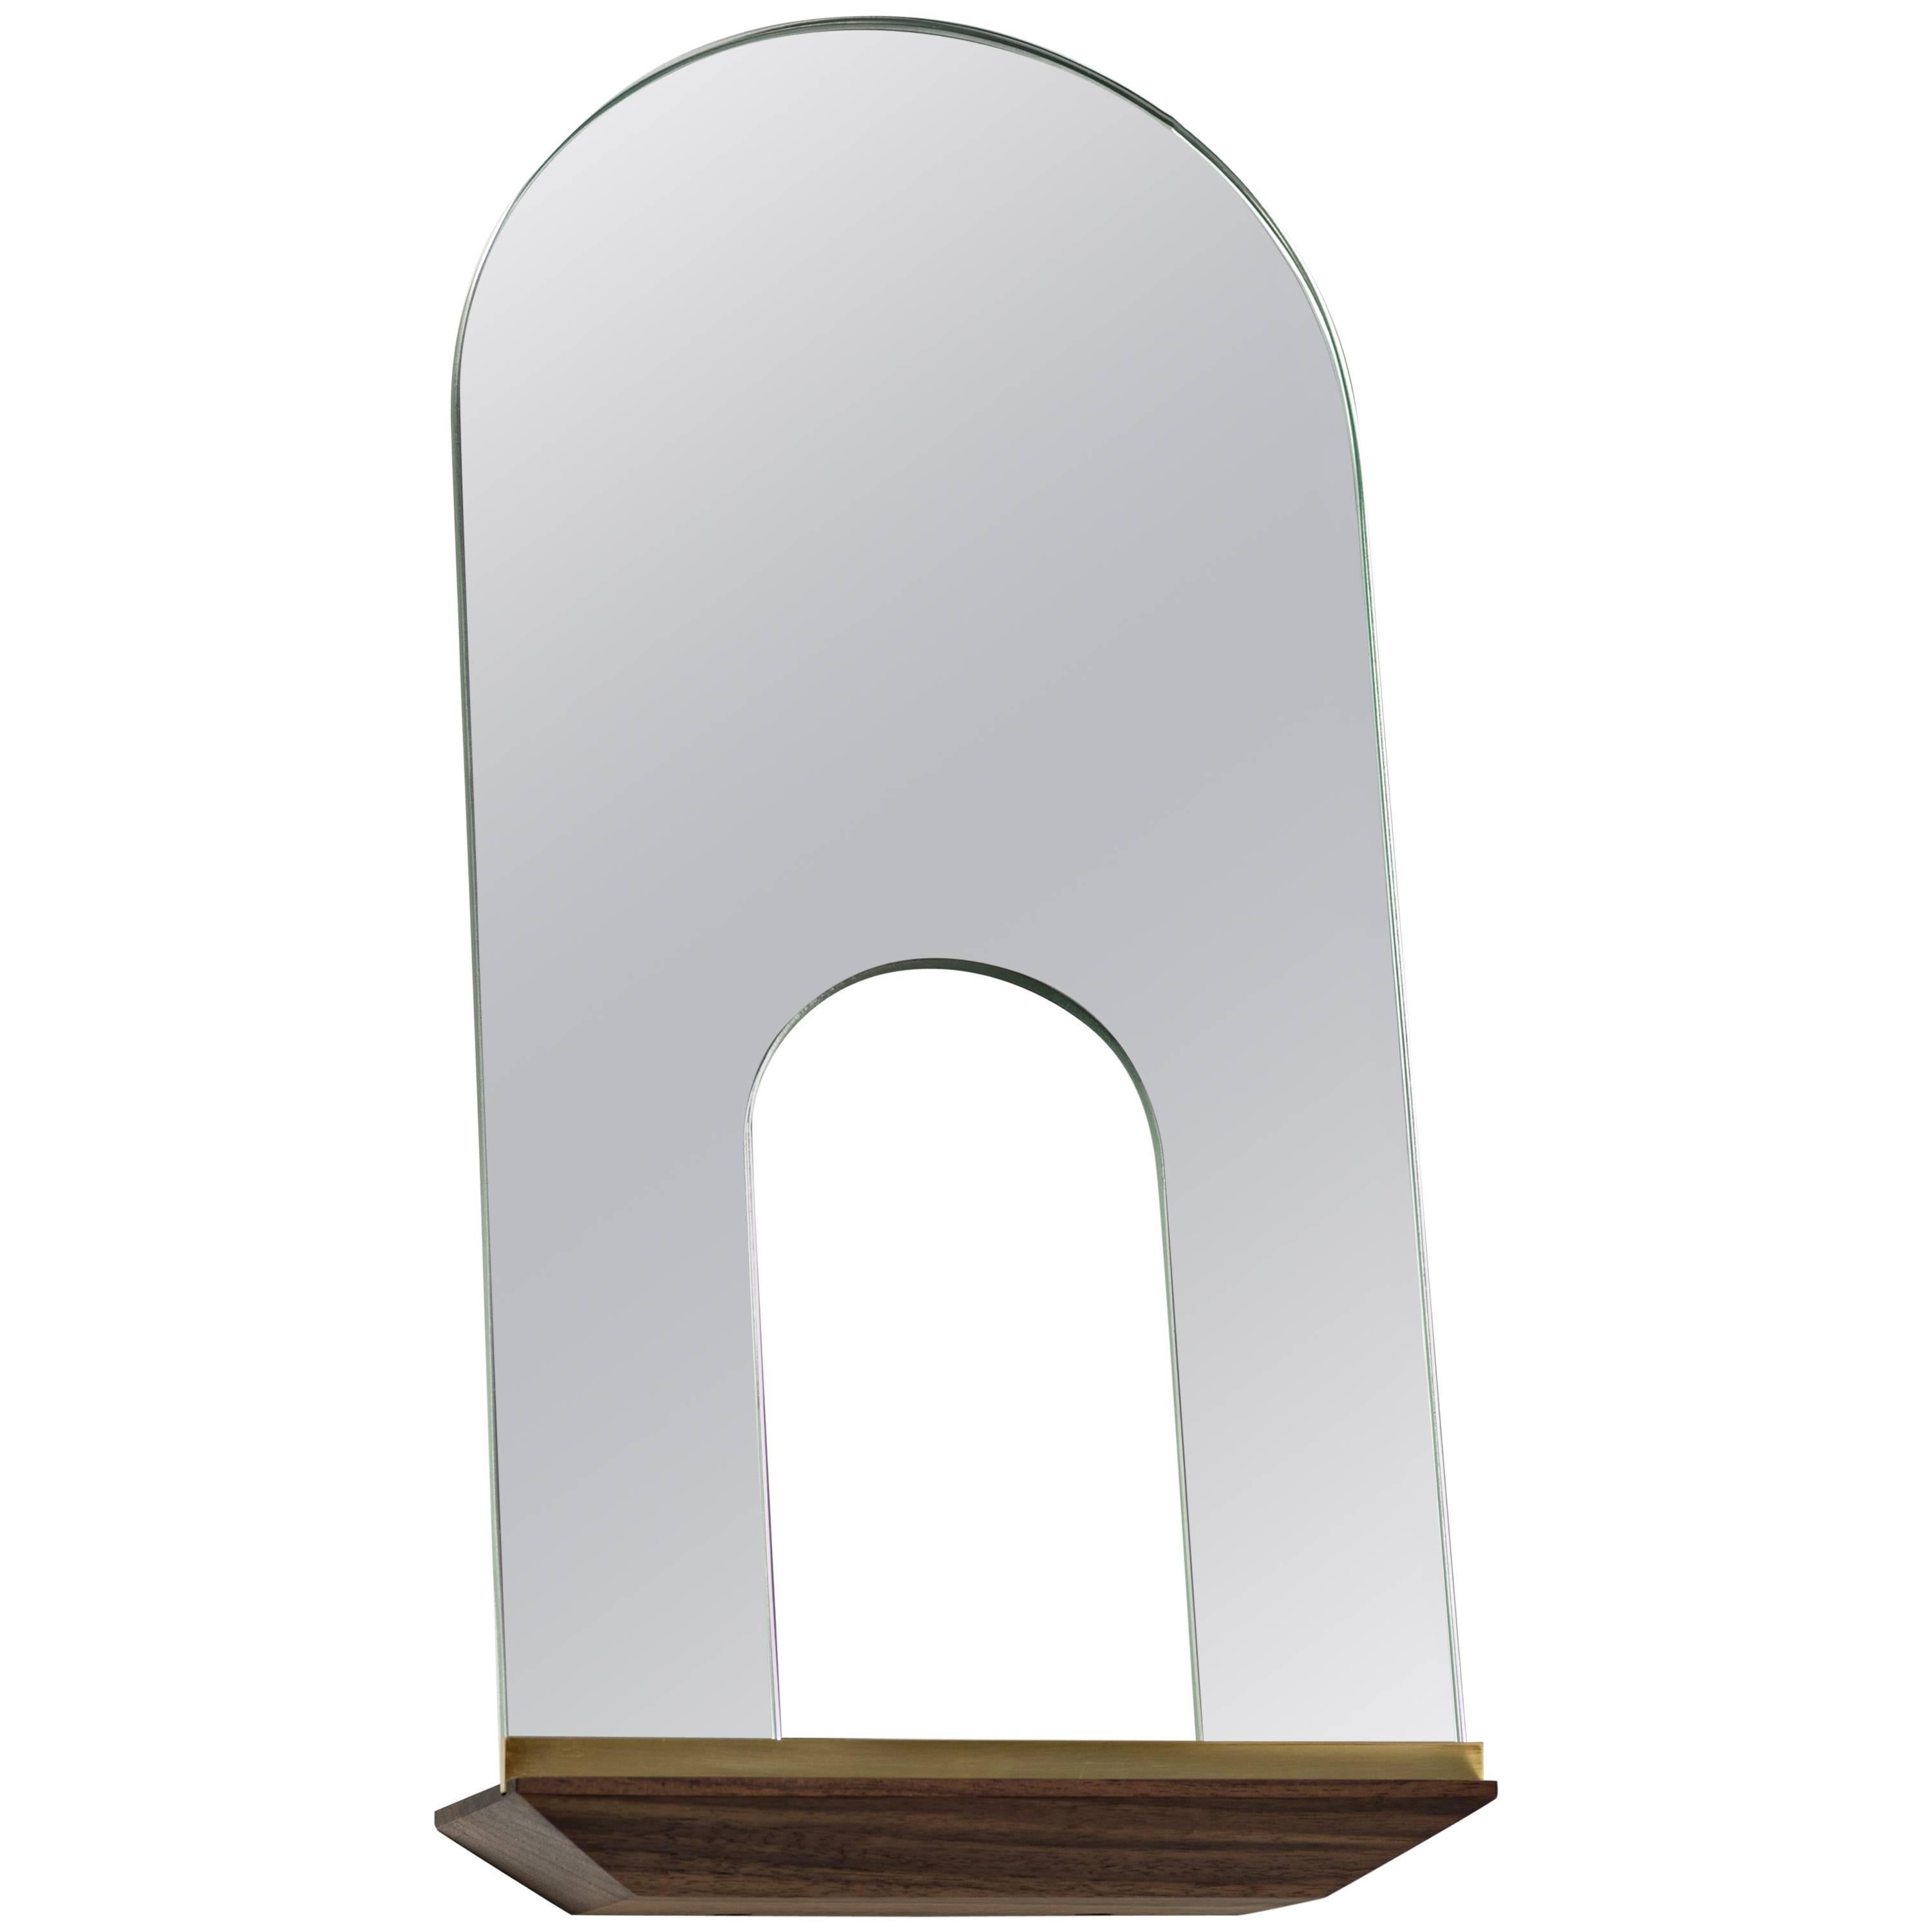 Propped Daily - Use Mirror by Phaedo, Arched with Void For Sale